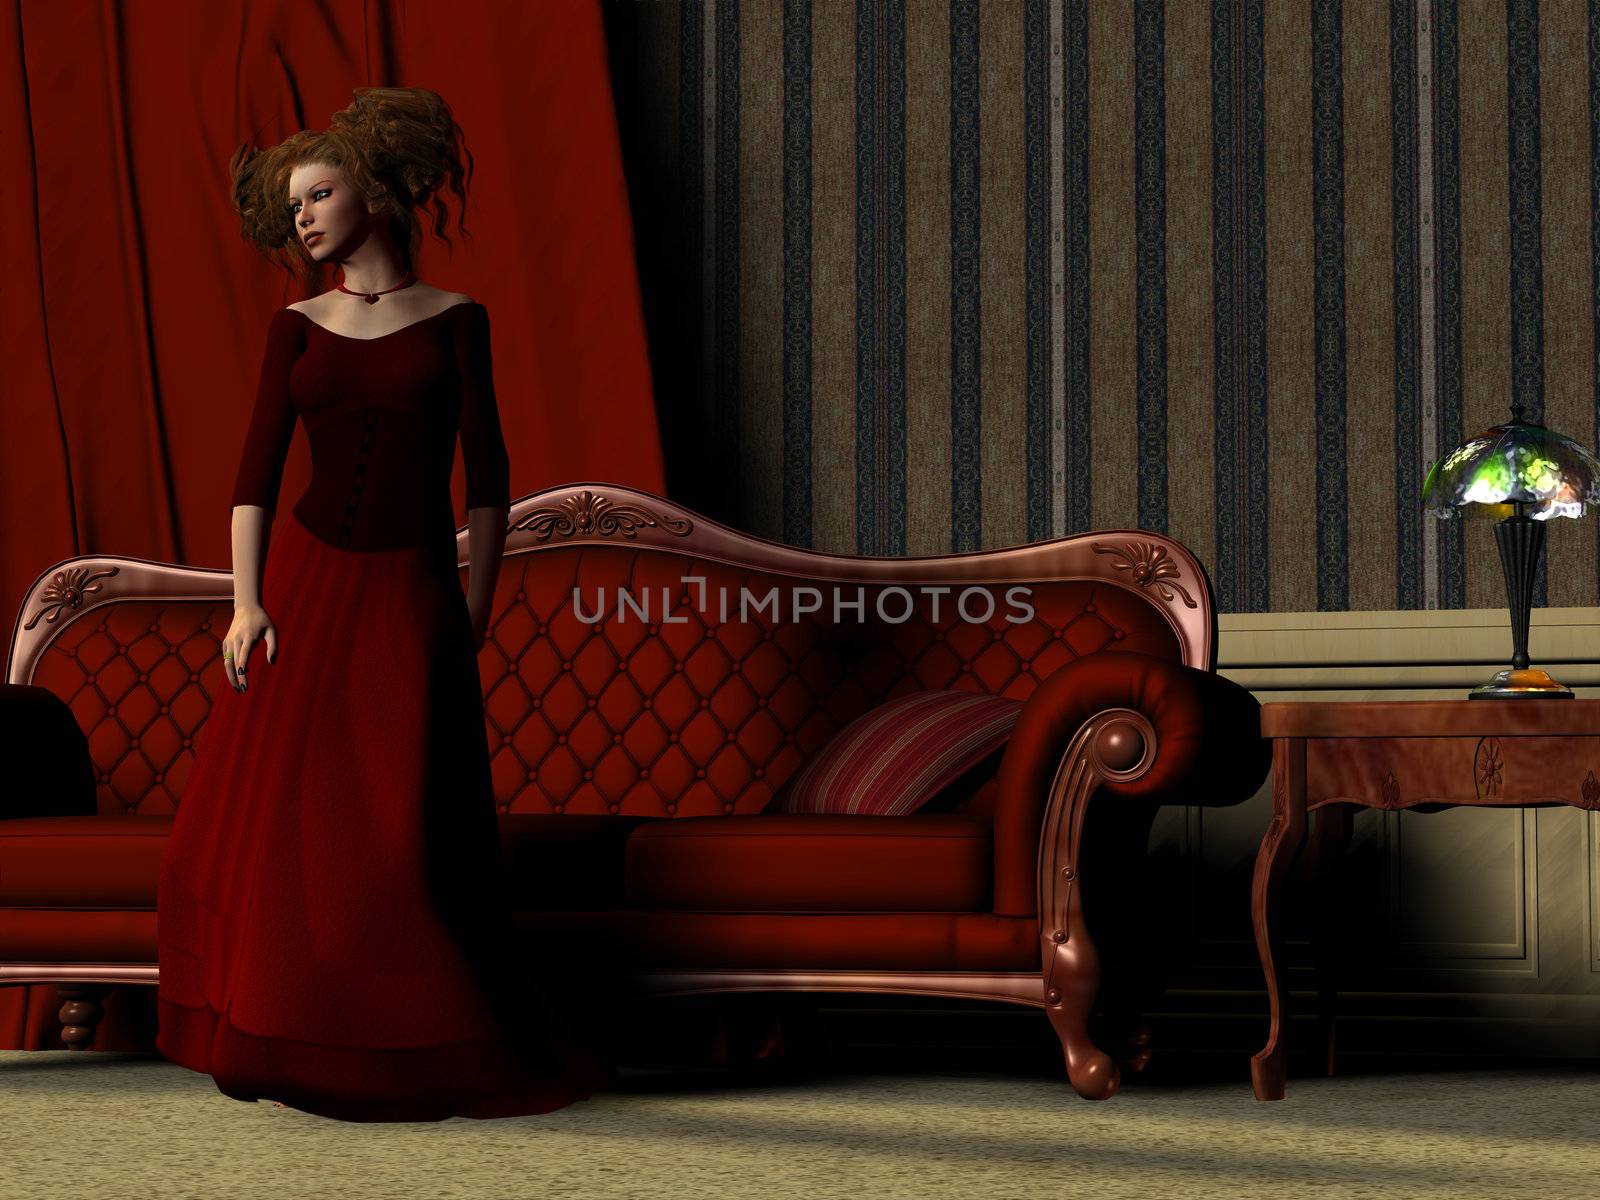 A beautiful women poses in a red dress in room full of luxury Victorian furniture.